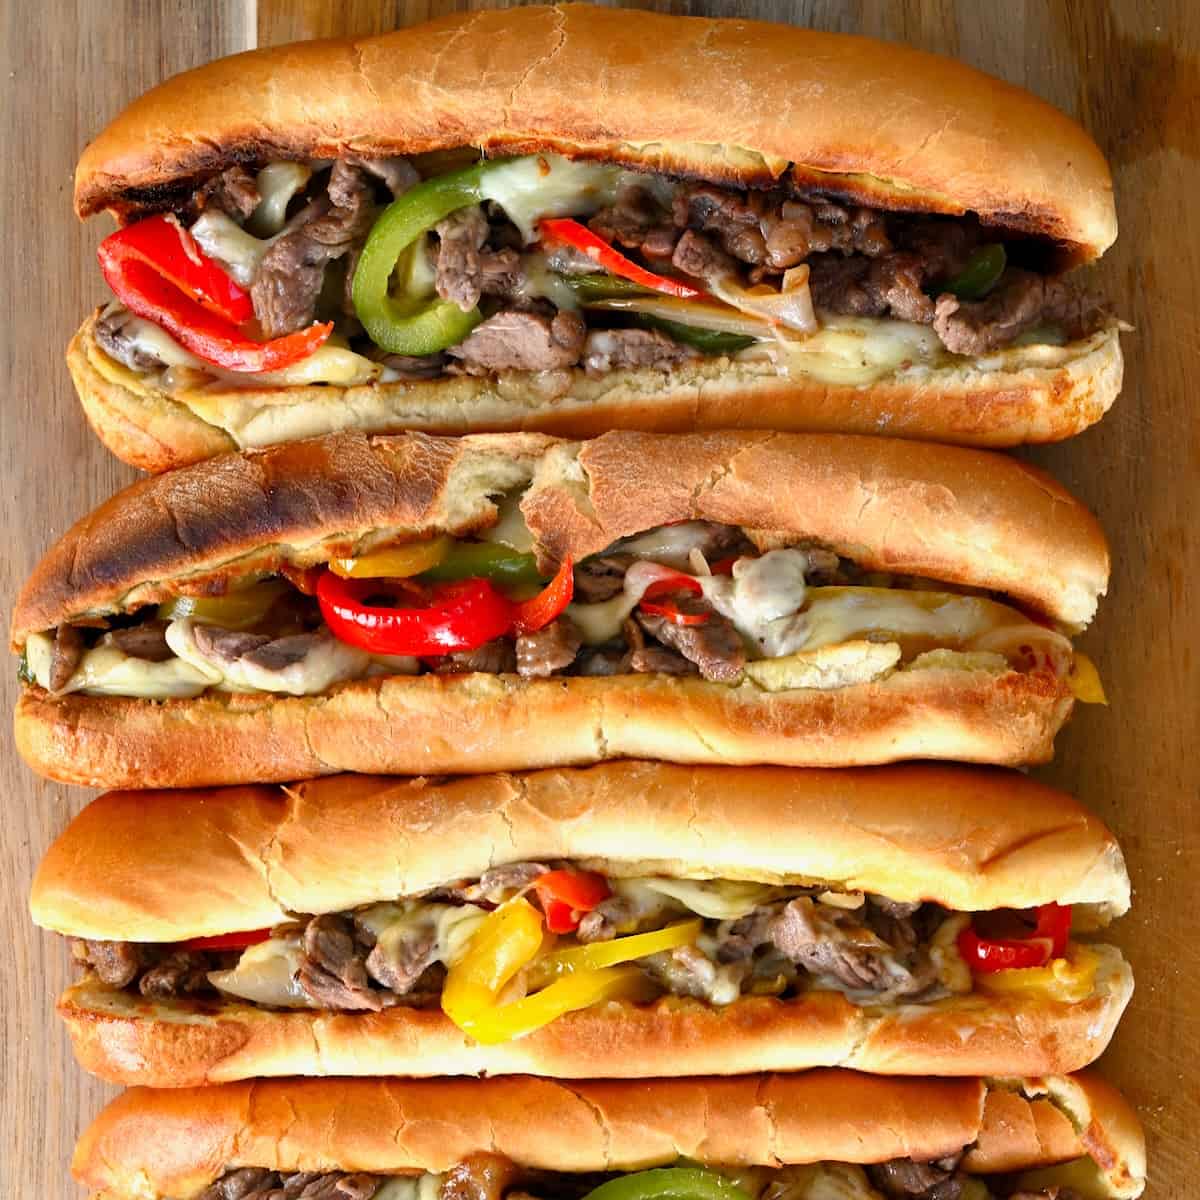 https://www.alphafoodie.com/wp-content/uploads/2022/09/philly-cheesesteak-1-of-1.jpeg